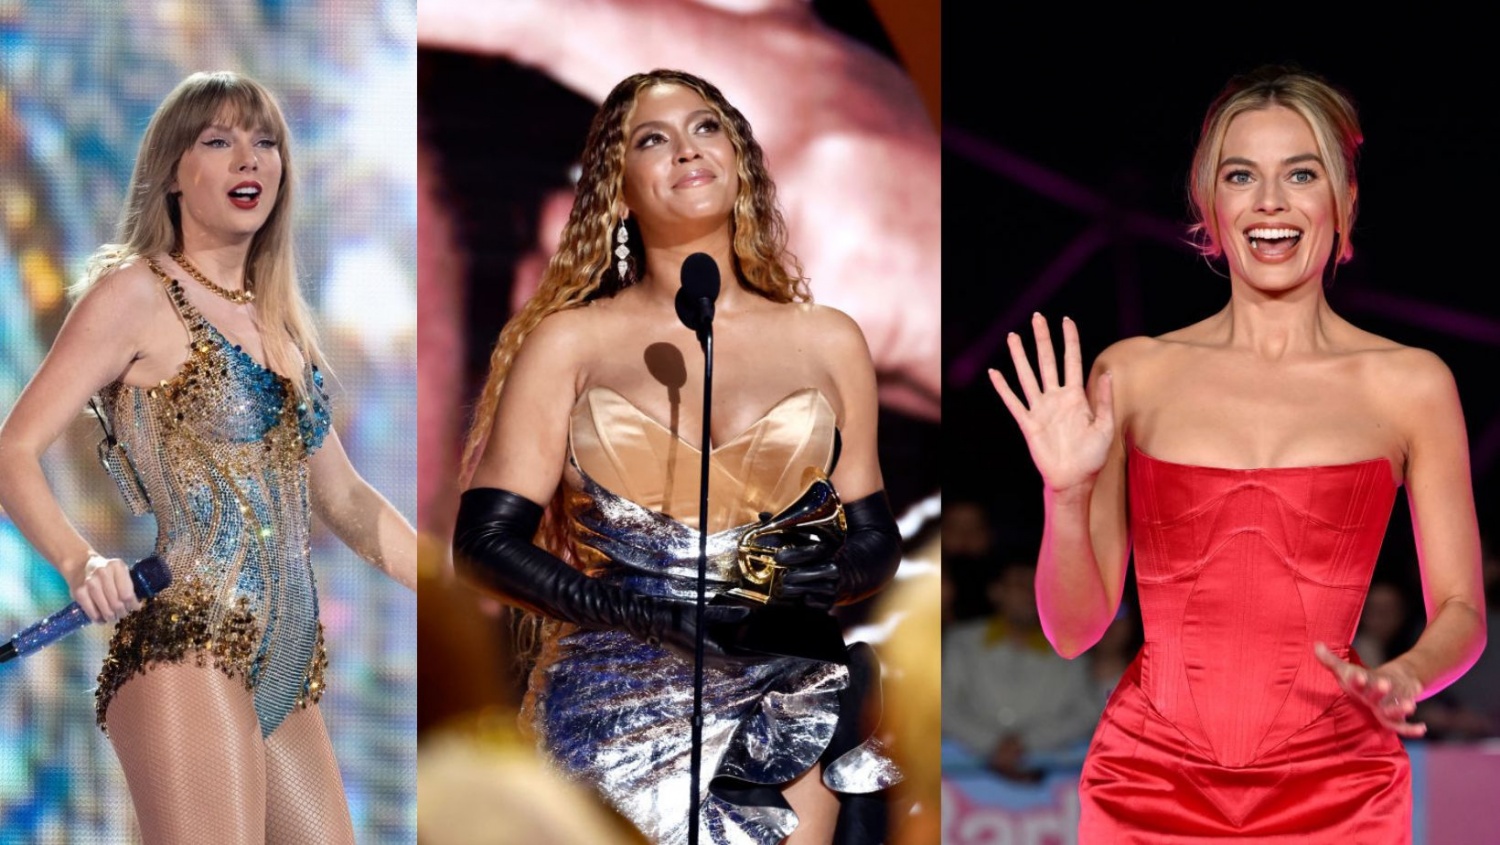 Taylor Swift, Beyonce, 'Barbie' Help Boost Economy On Top of Being Pop Culture Milestones? 